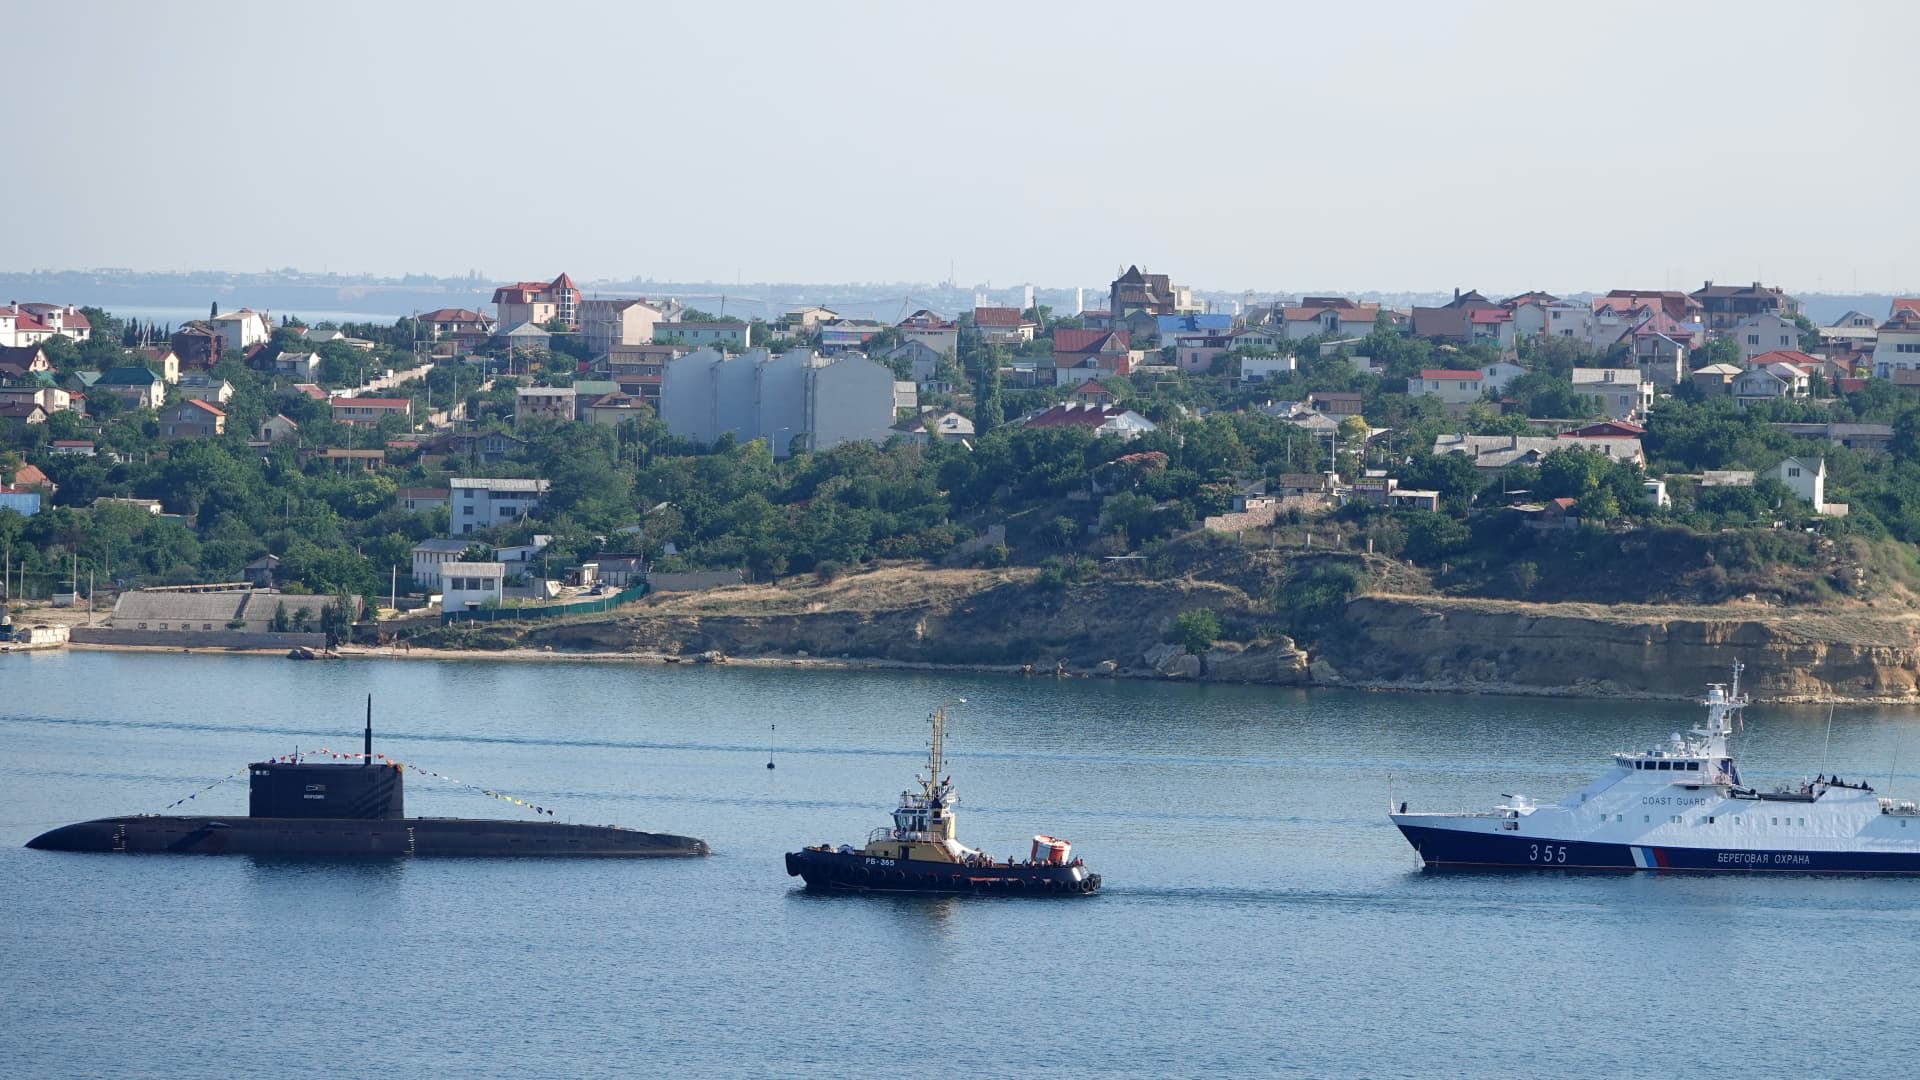 A submarine and warships of the Russian Black Sea Fleet lie at anchor in the port city of Sevastopol in 2019.